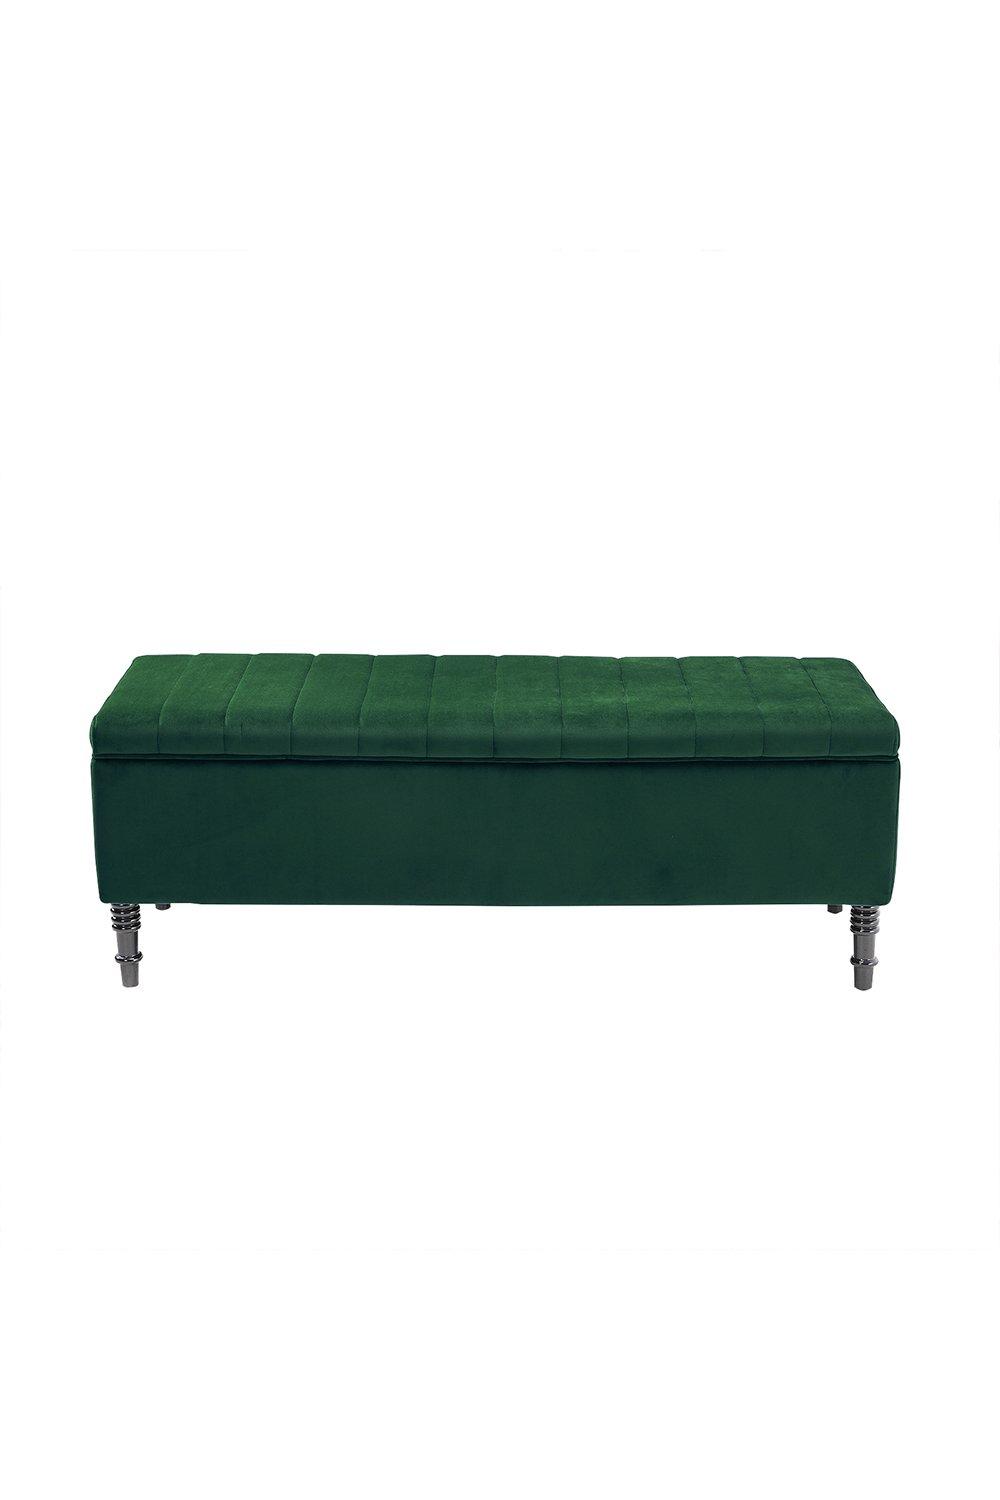 Green Upholstered Storage Ottoman Entryway Bench